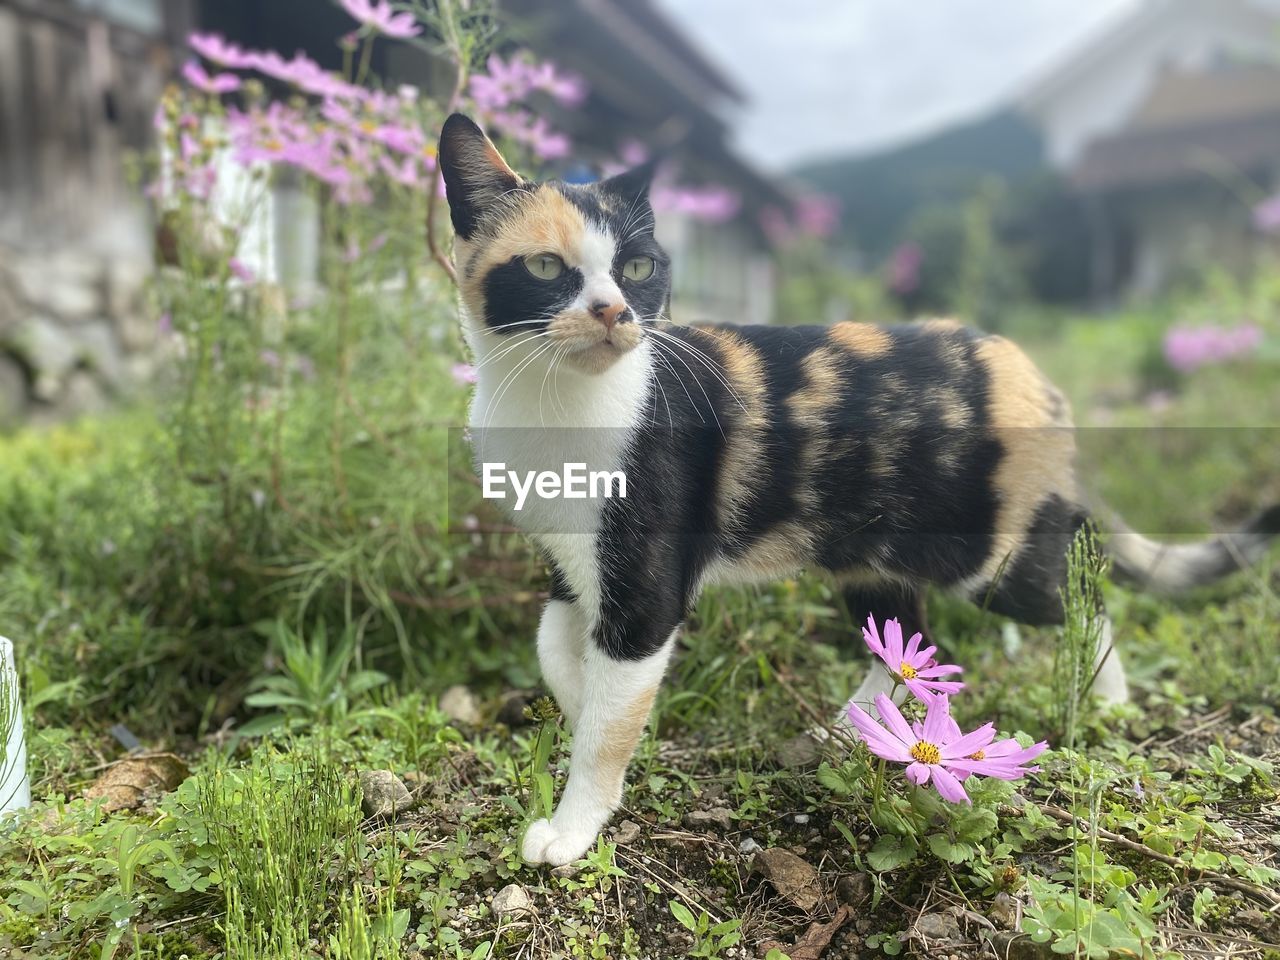 animal, animal themes, mammal, one animal, pet, domestic animals, plant, flowering plant, flower, cat, domestic cat, grass, nature, feline, no people, front or back yard, carnivore, cute, portrait, young animal, small to medium-sized cats, felidae, outdoors, day, looking, beauty in nature